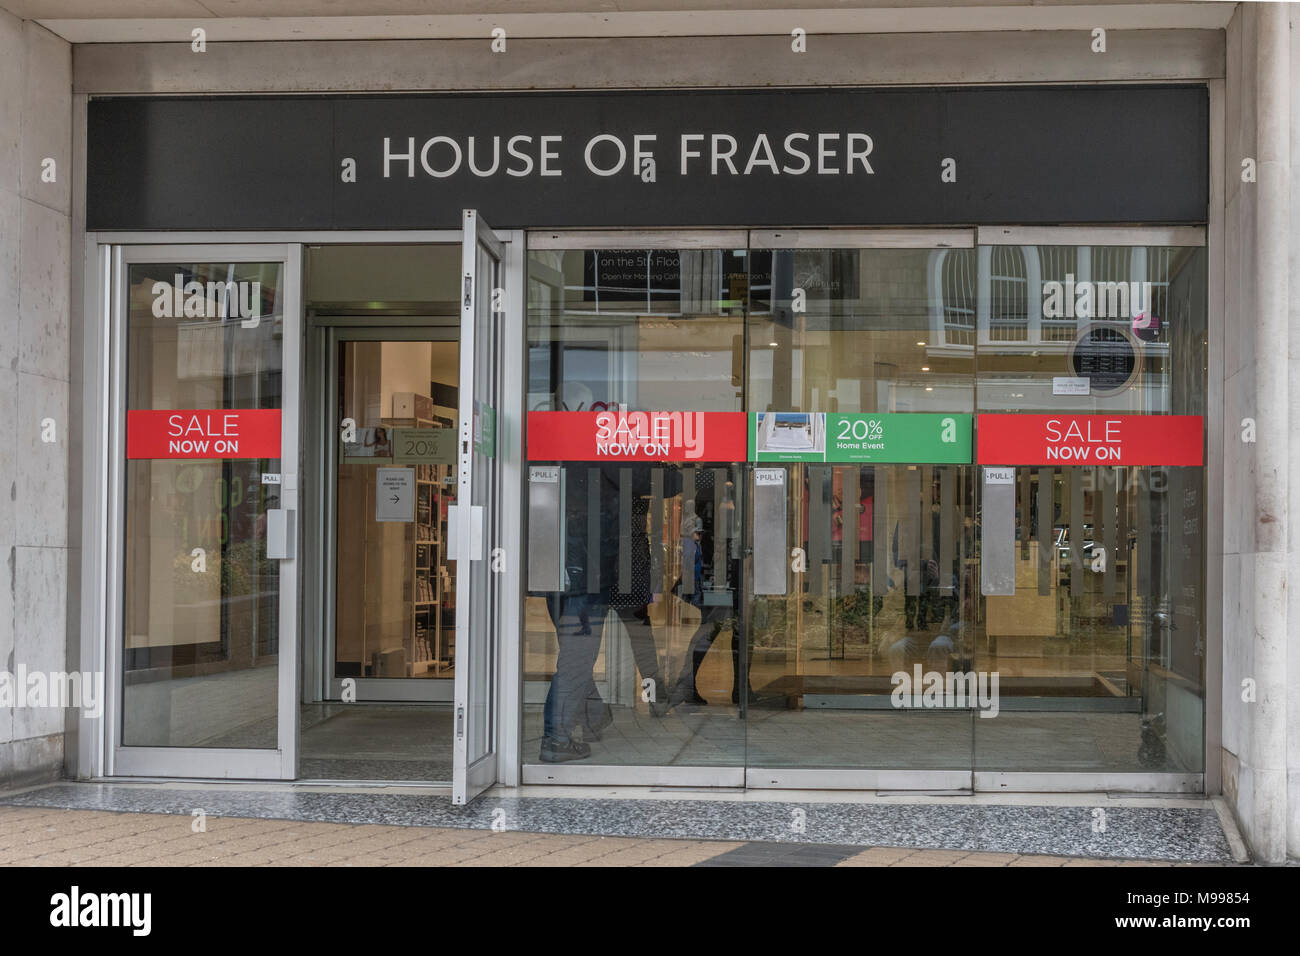 Exterior entrance House of Fraser shop Plymouth, Devon. Metaphor House of Fraser shop closures (2018), Death of the High Street, high street squeeze. Stock Photo